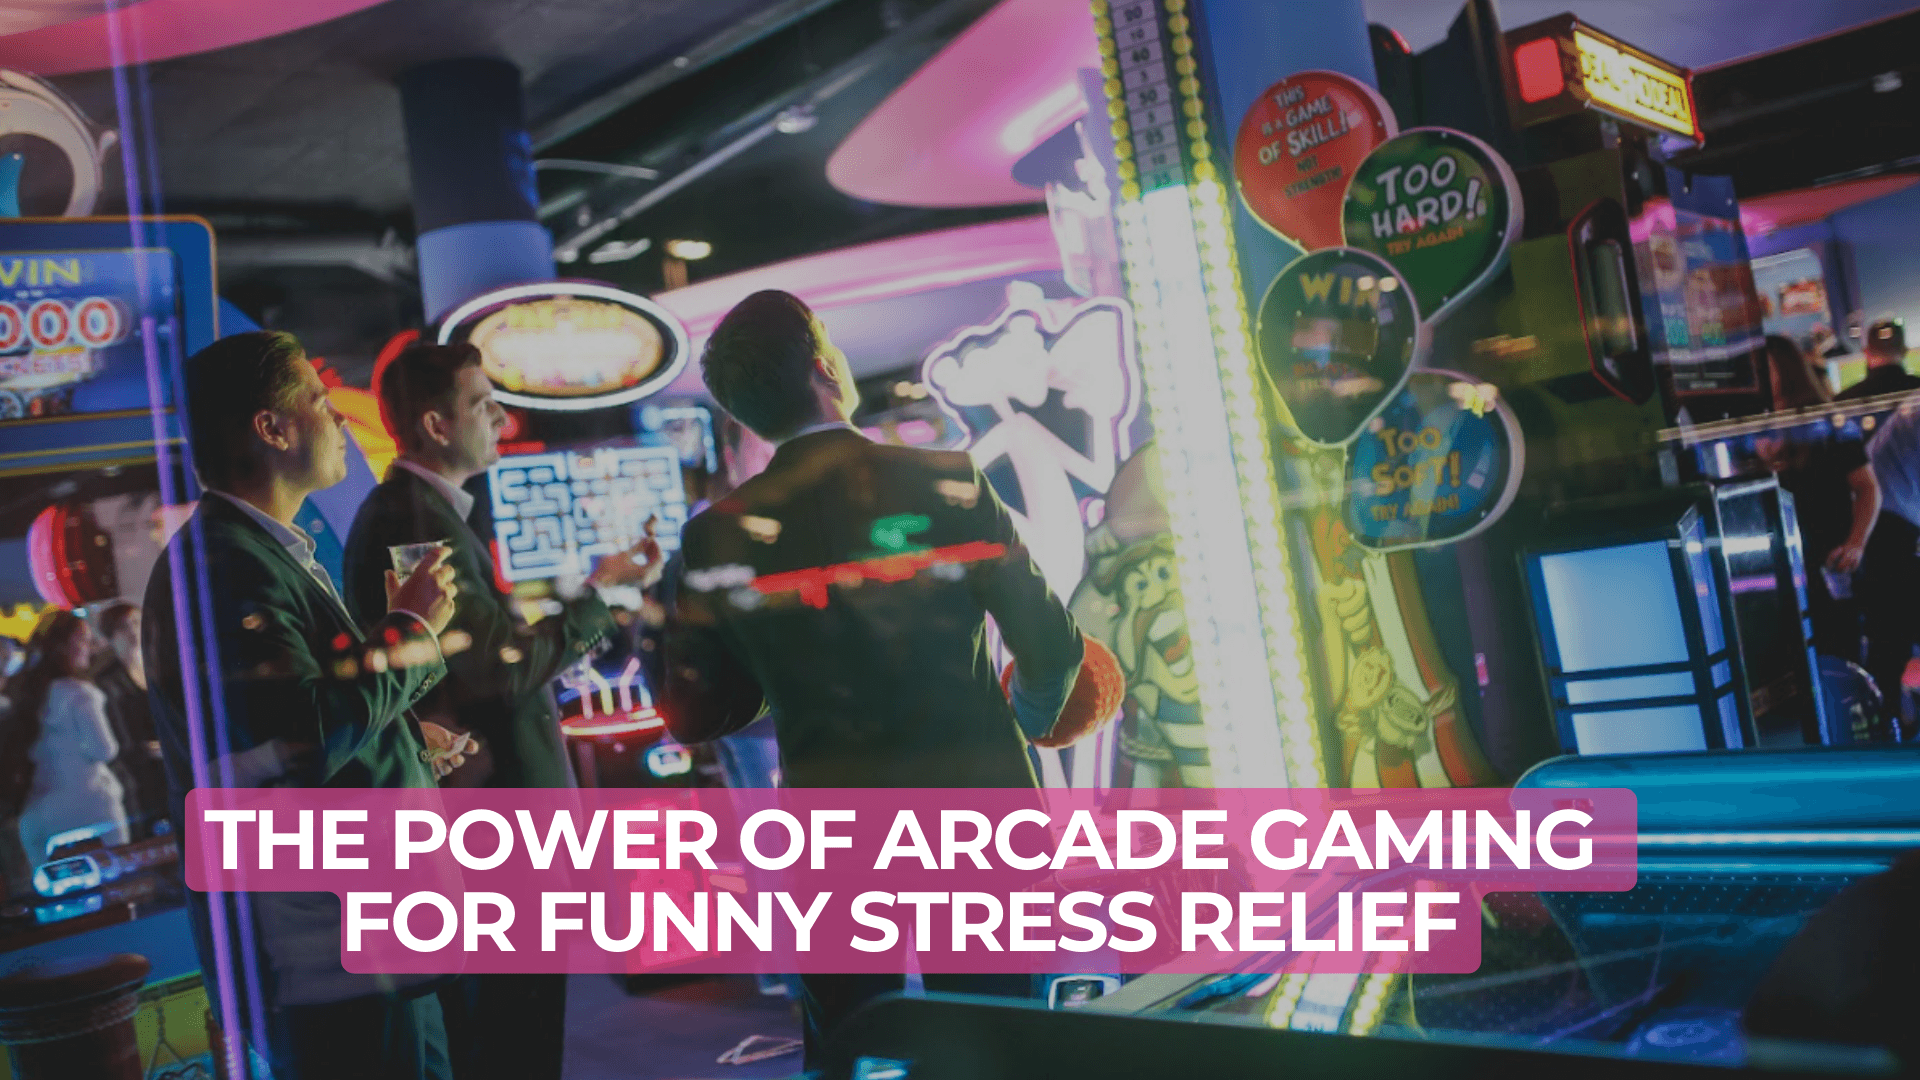 The power of arcade gaming for funny stress relief - Gamestate